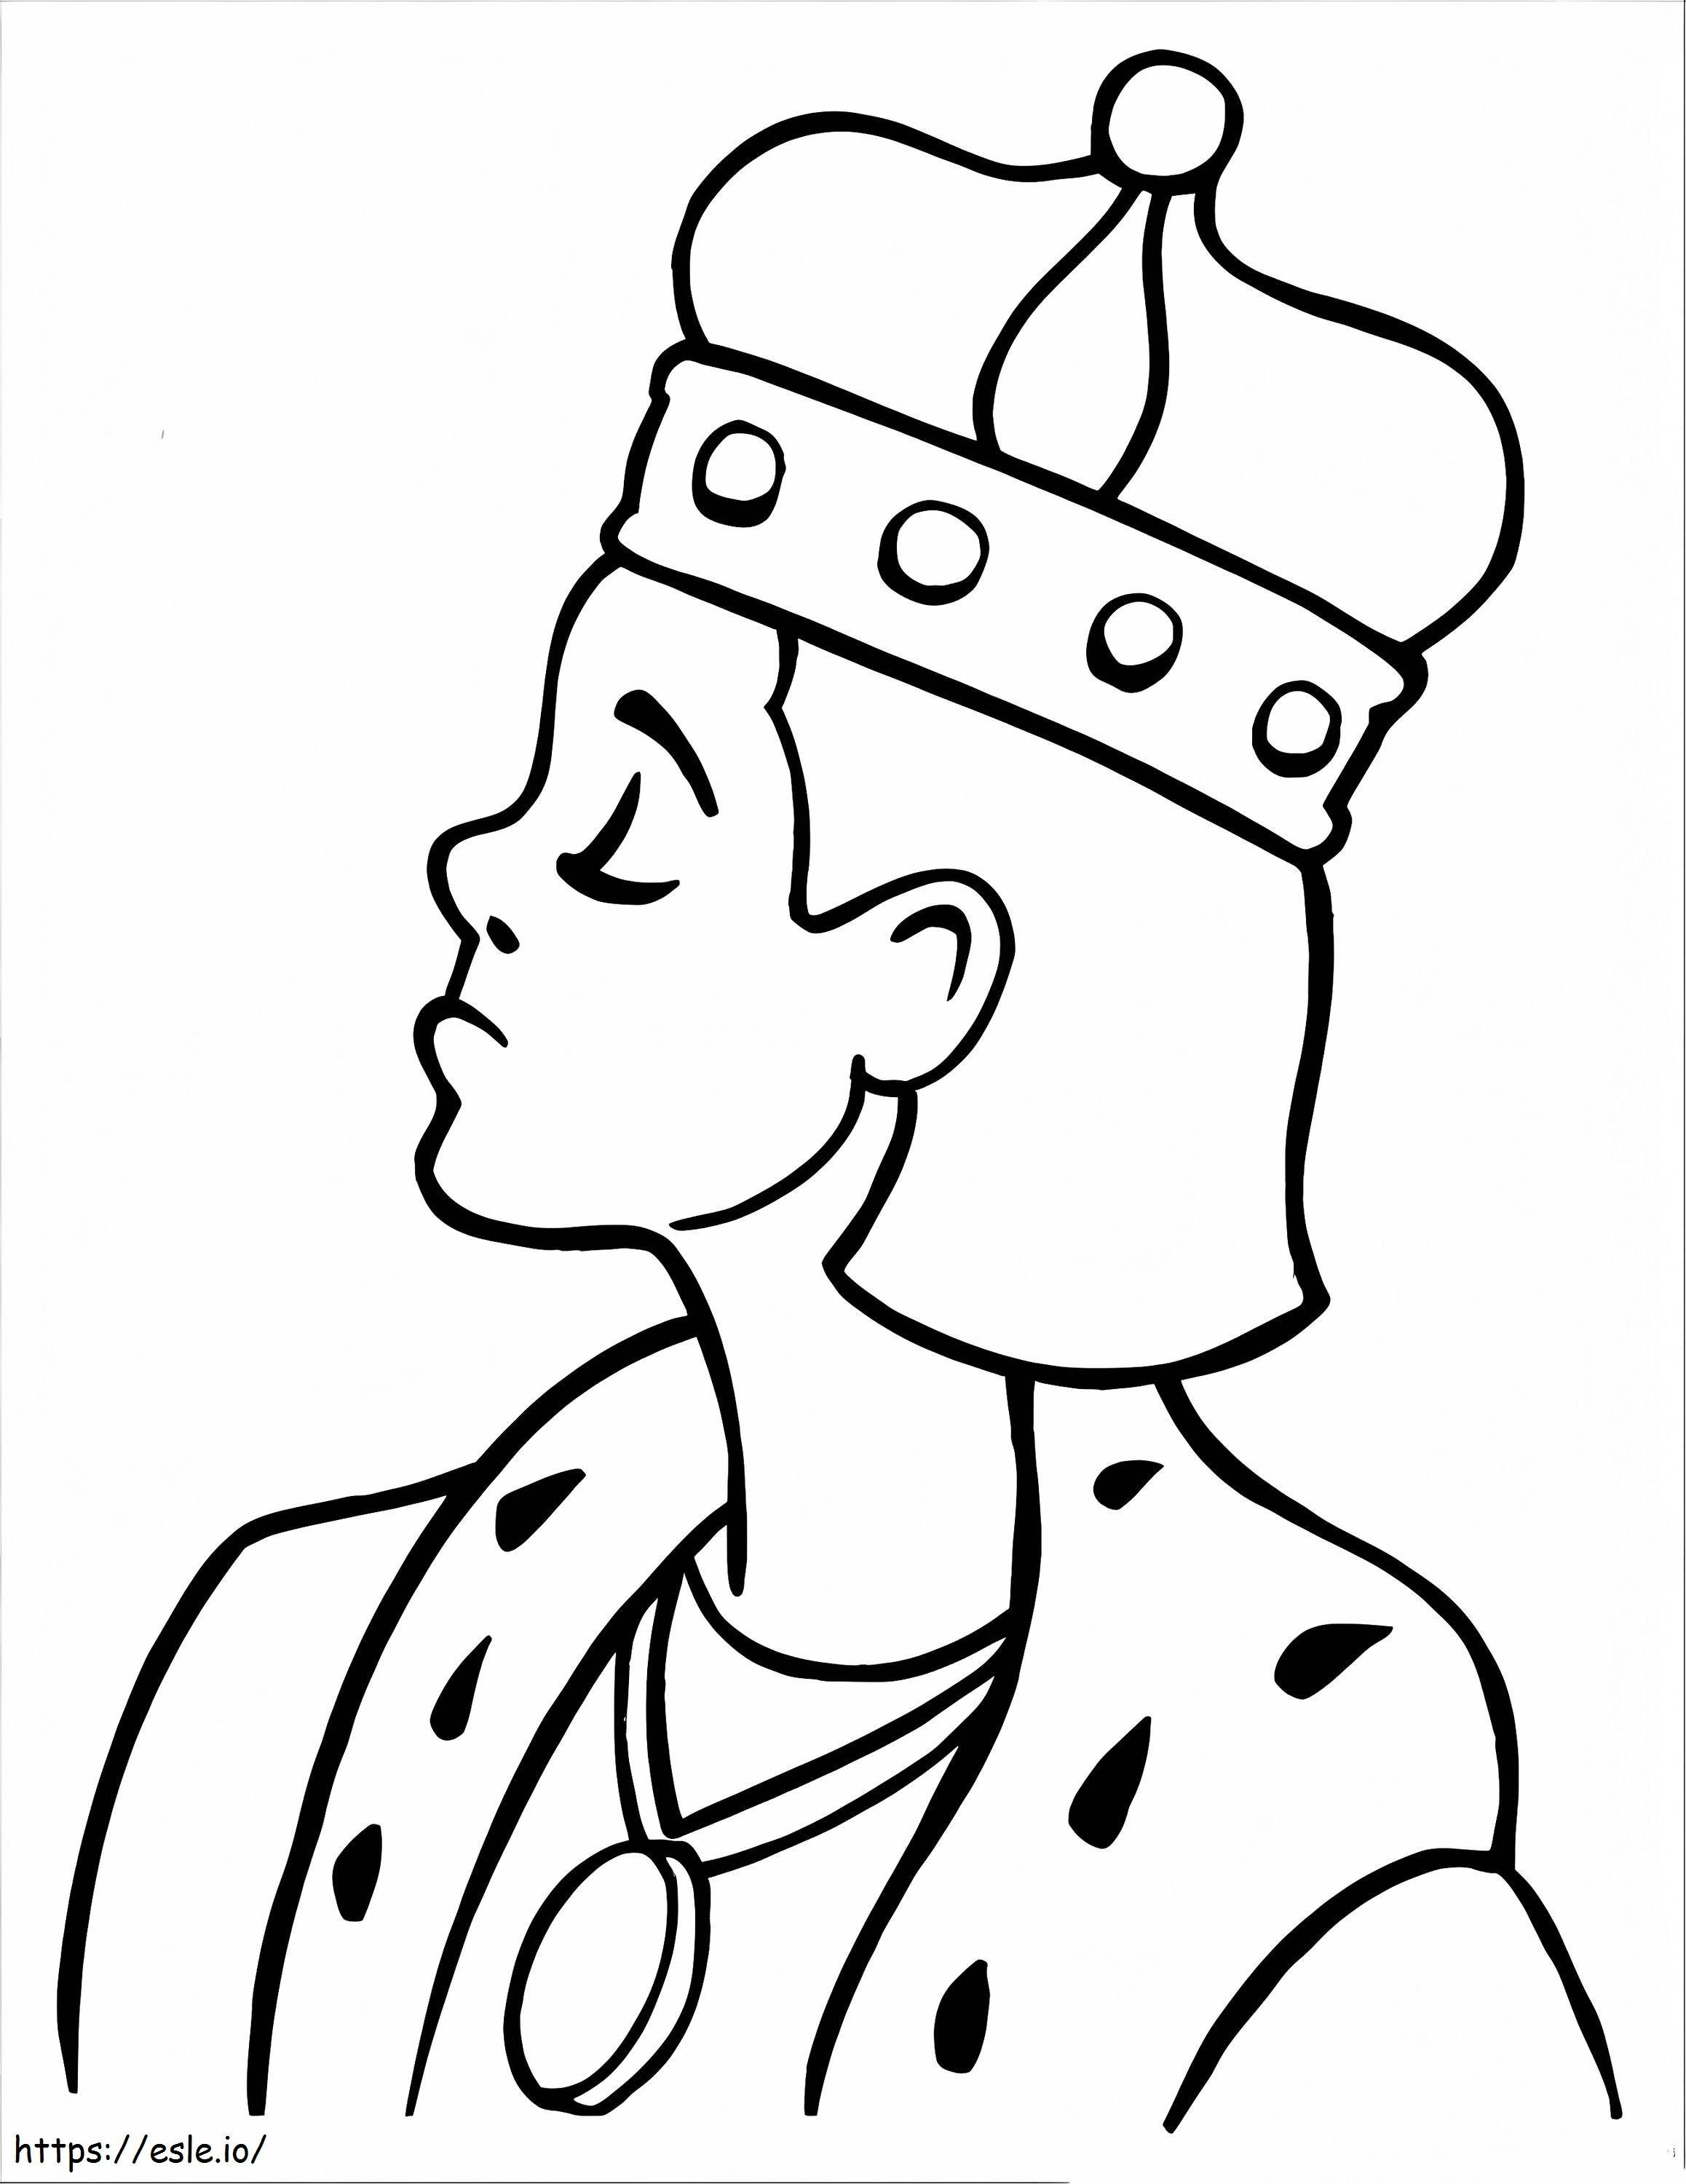 Bored King coloring page